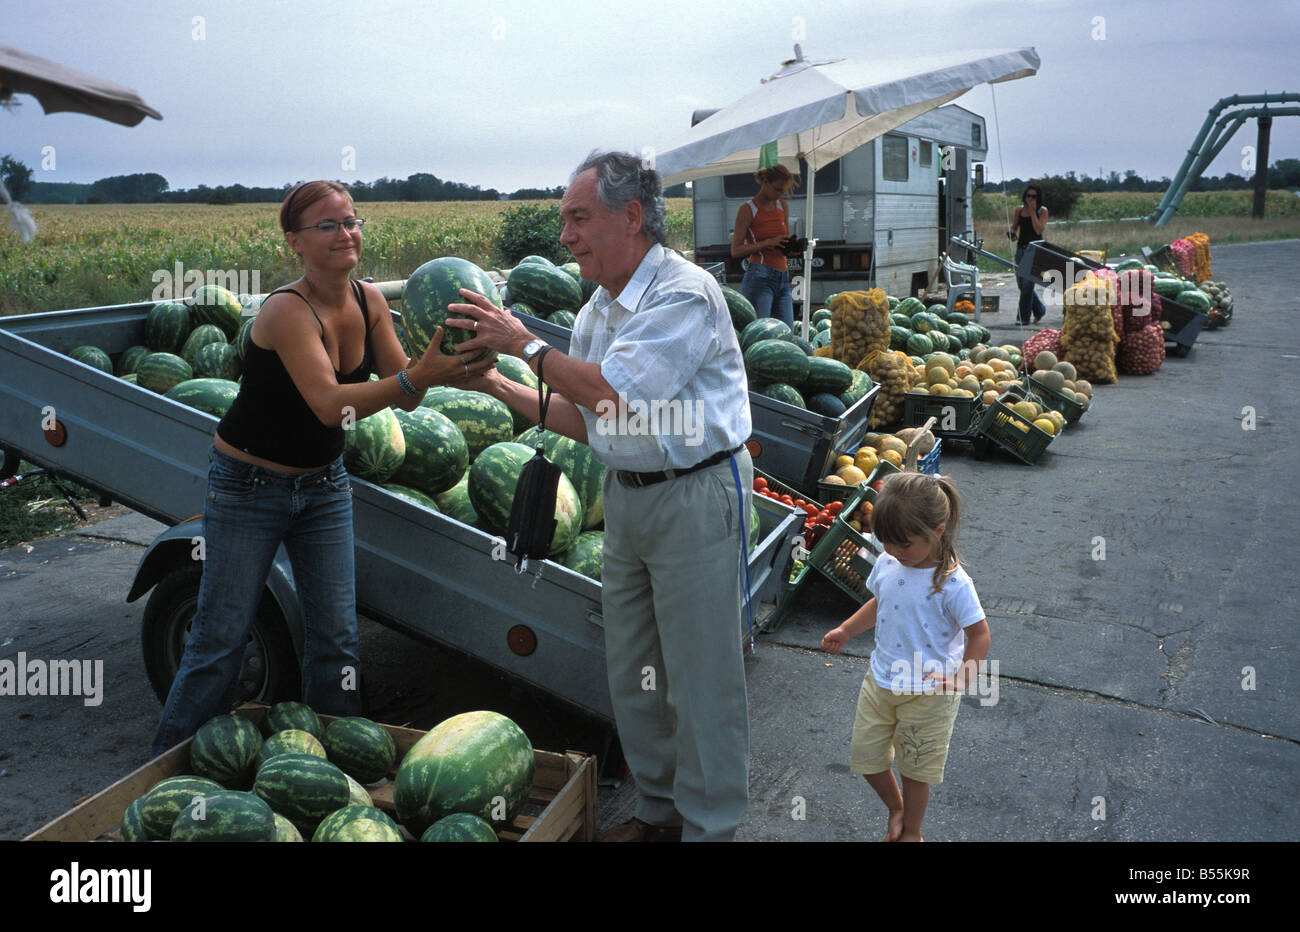 Man buying a water mellon at a roadside market stall in Slovakia europe Stock Photo